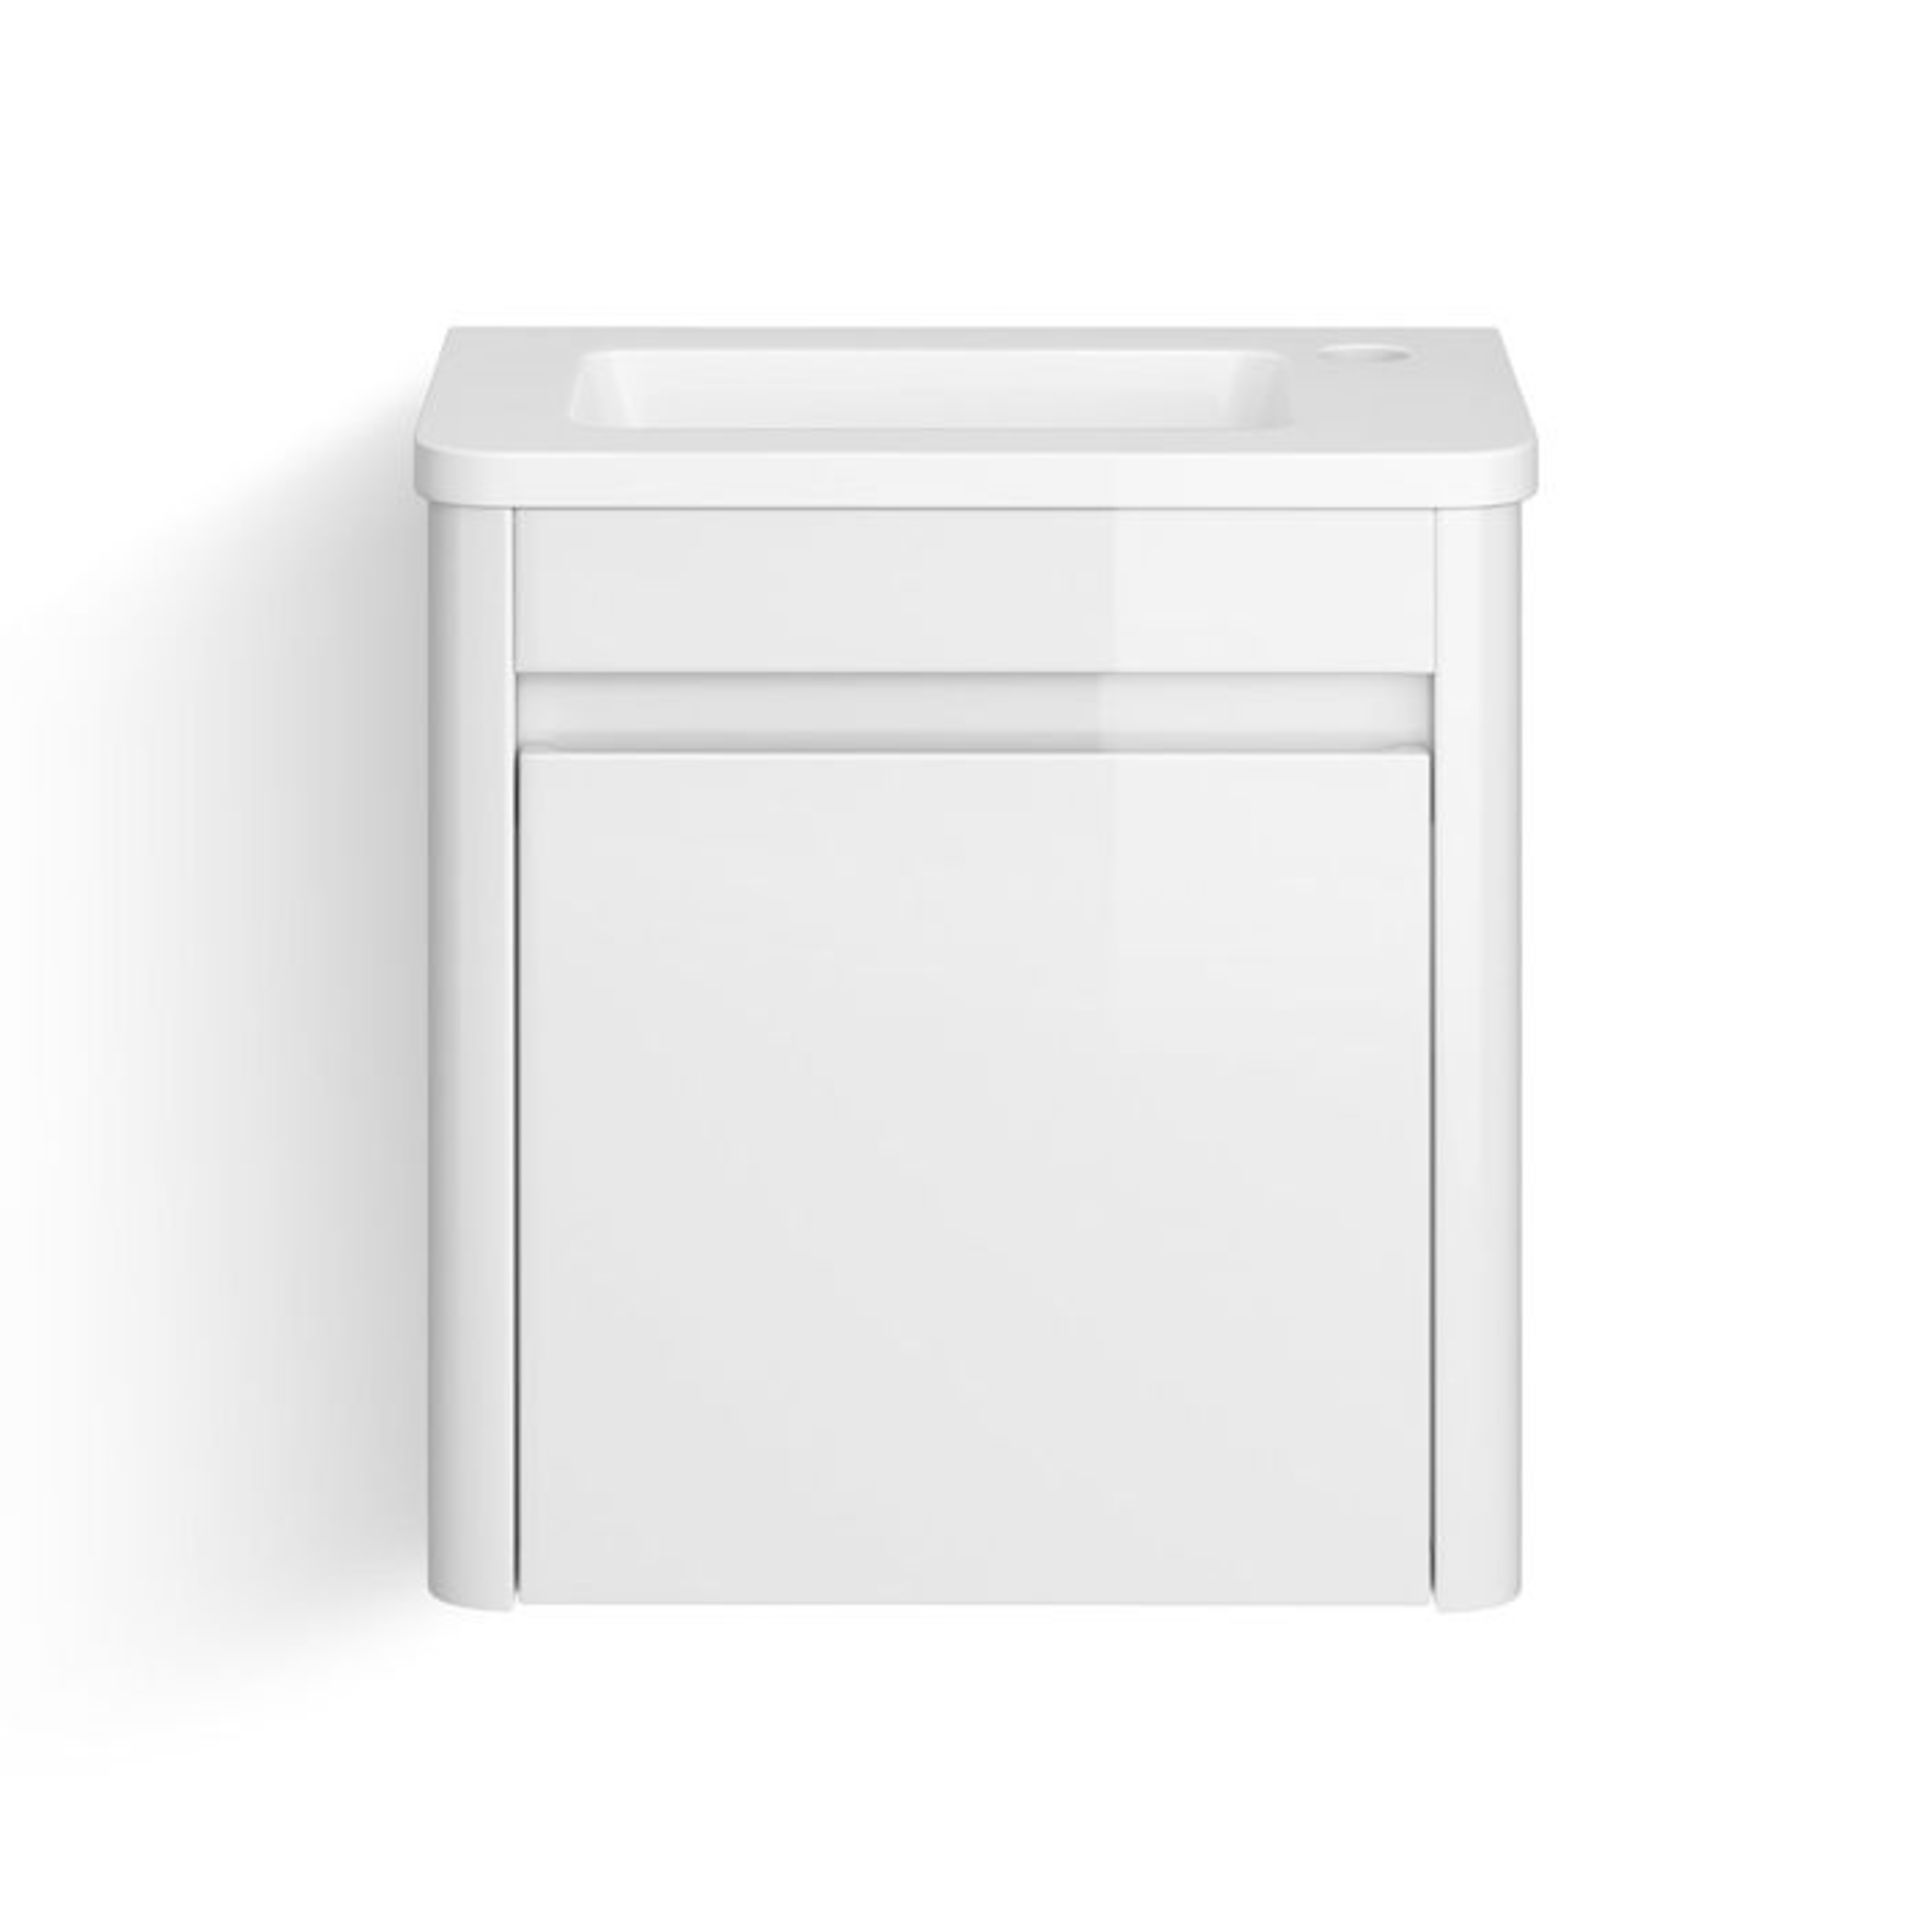 (PP24) 400mm Denver White Right Hand Cloakroom Vanity Unit - Wall Hung. RRP £299.99. Comes com... - Image 5 of 5